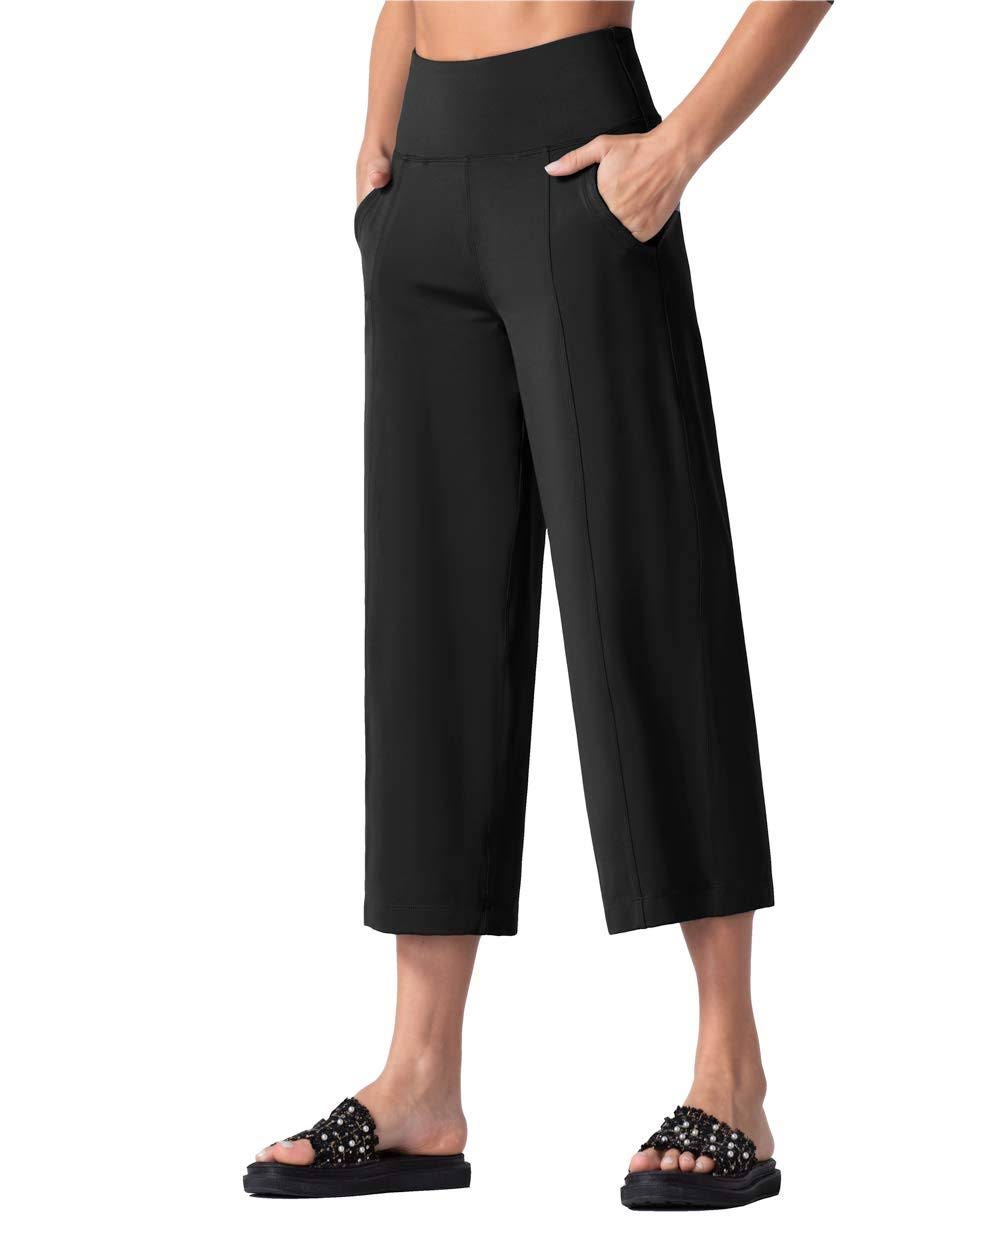 High Waisted Black Pants with Tummy Control | Image